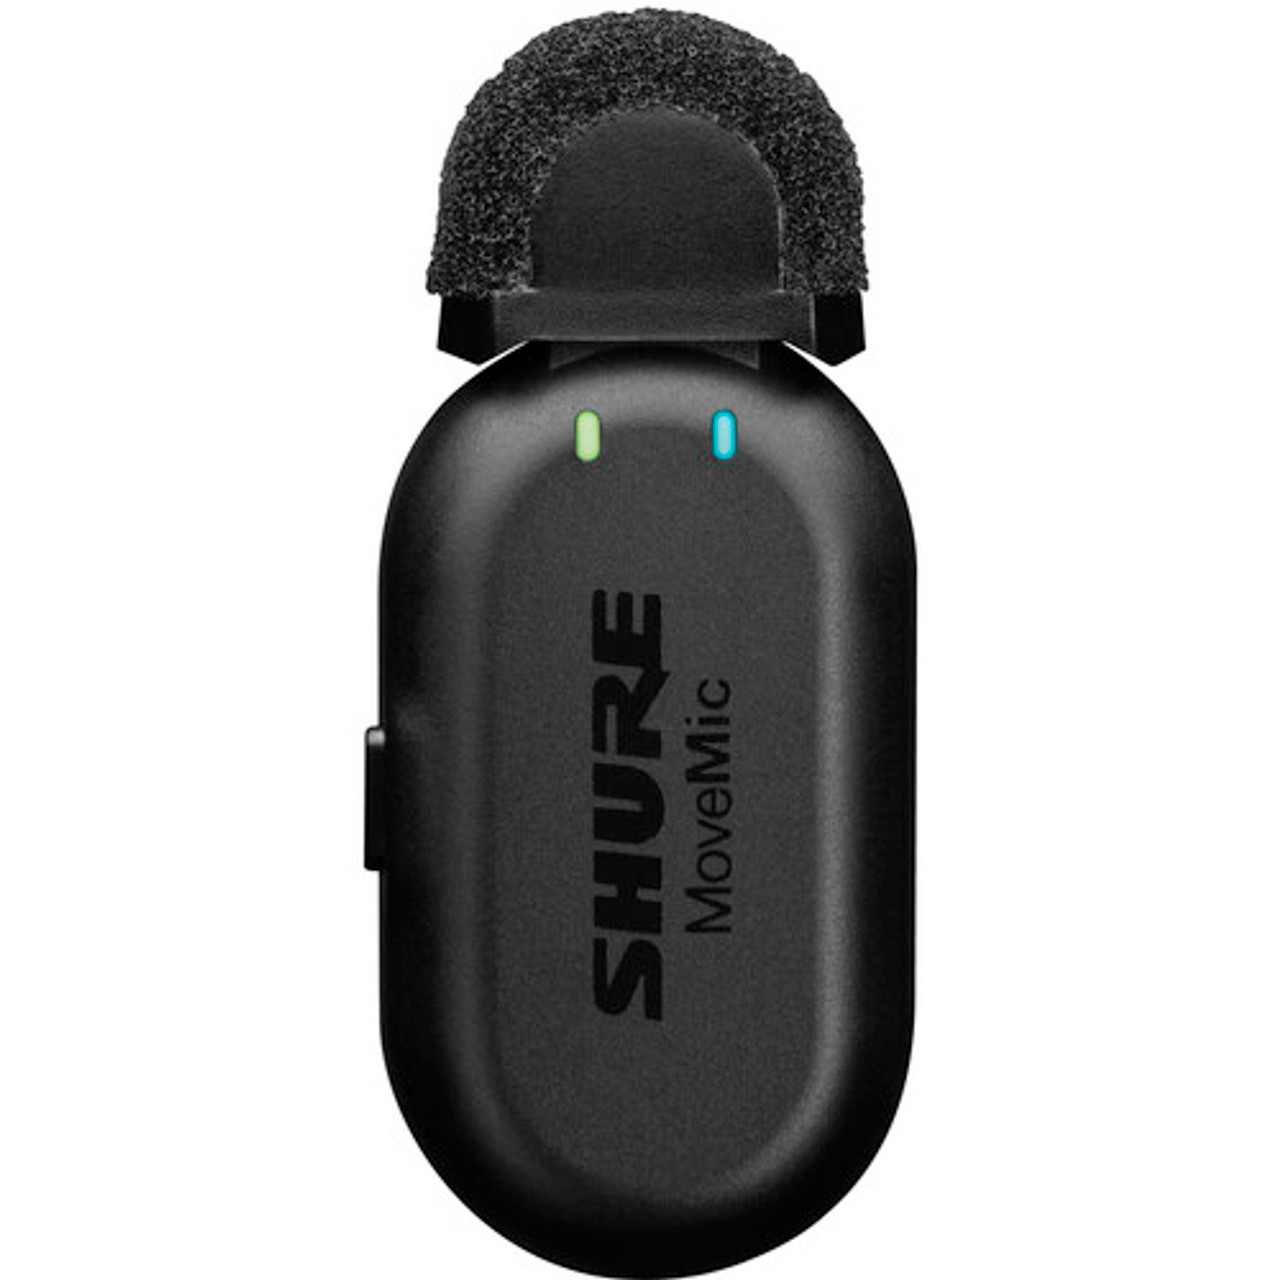 Shure MV-ONE-Z7 MoveMic One 1-Person Clip-On Wireless Microphone System for Mobile Devices (MV-ONE-Z7)